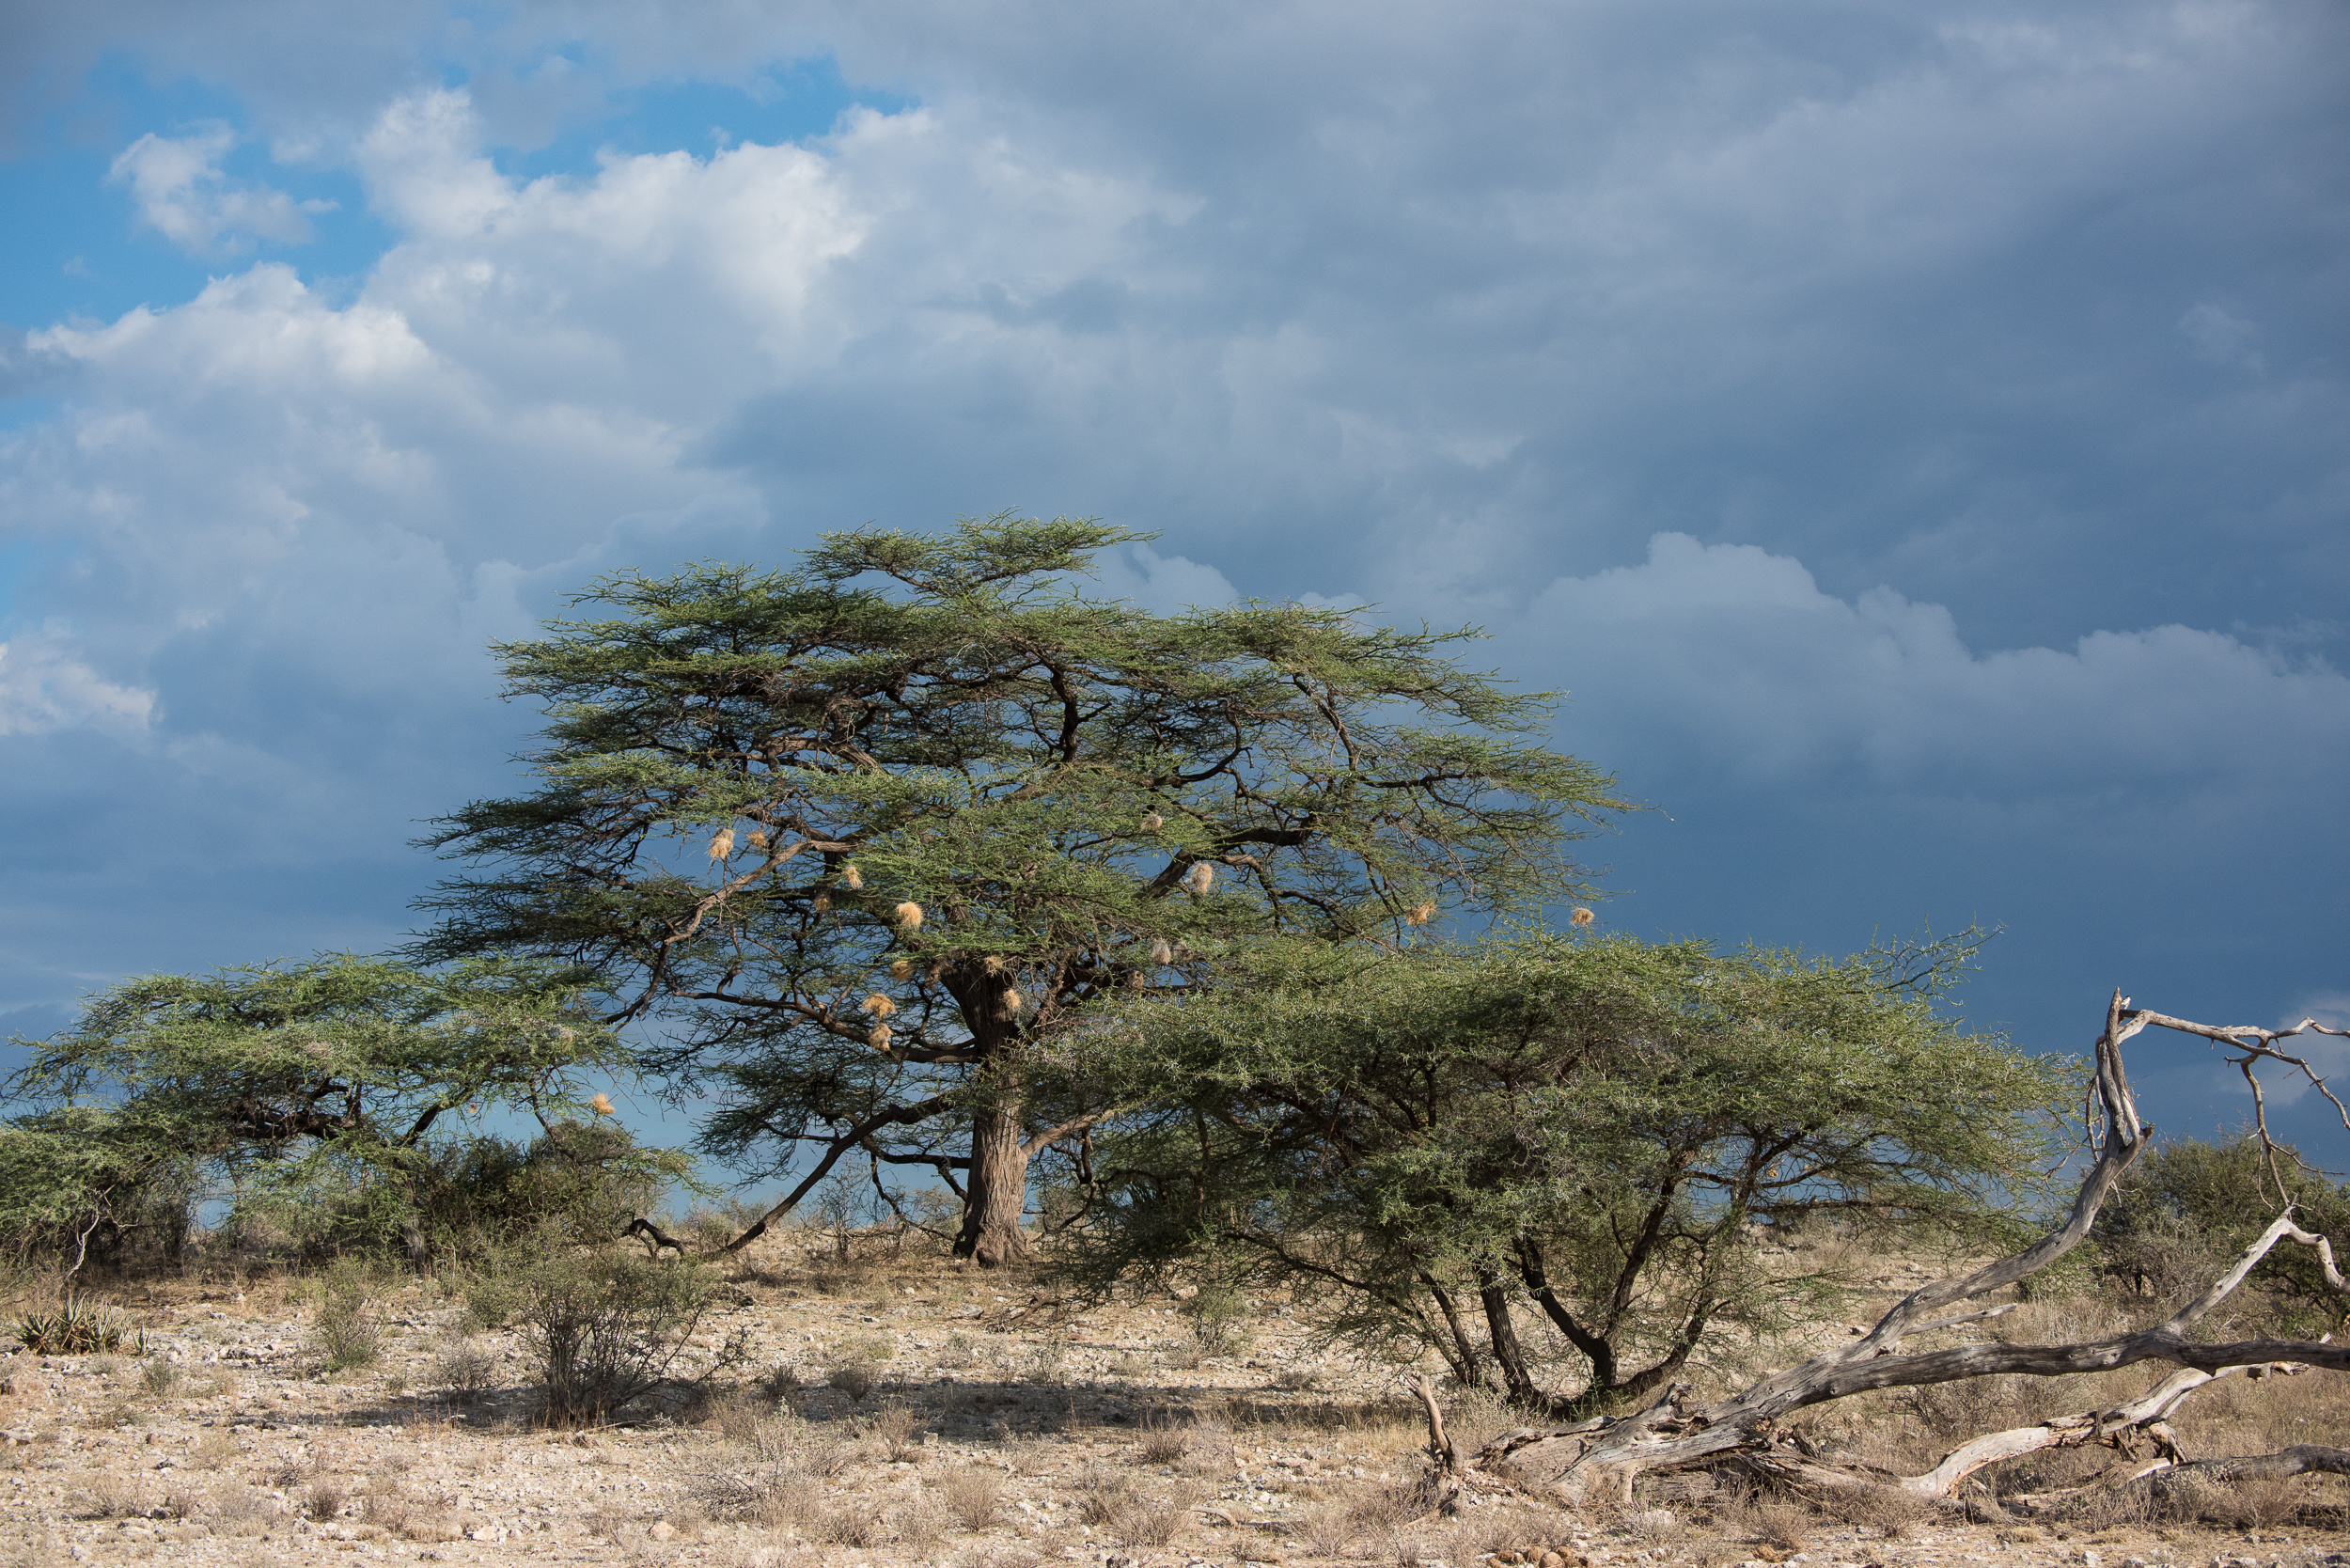 Acacia trees with weaver nests, white in the sunlight against a dark blu-grey stormy sky.